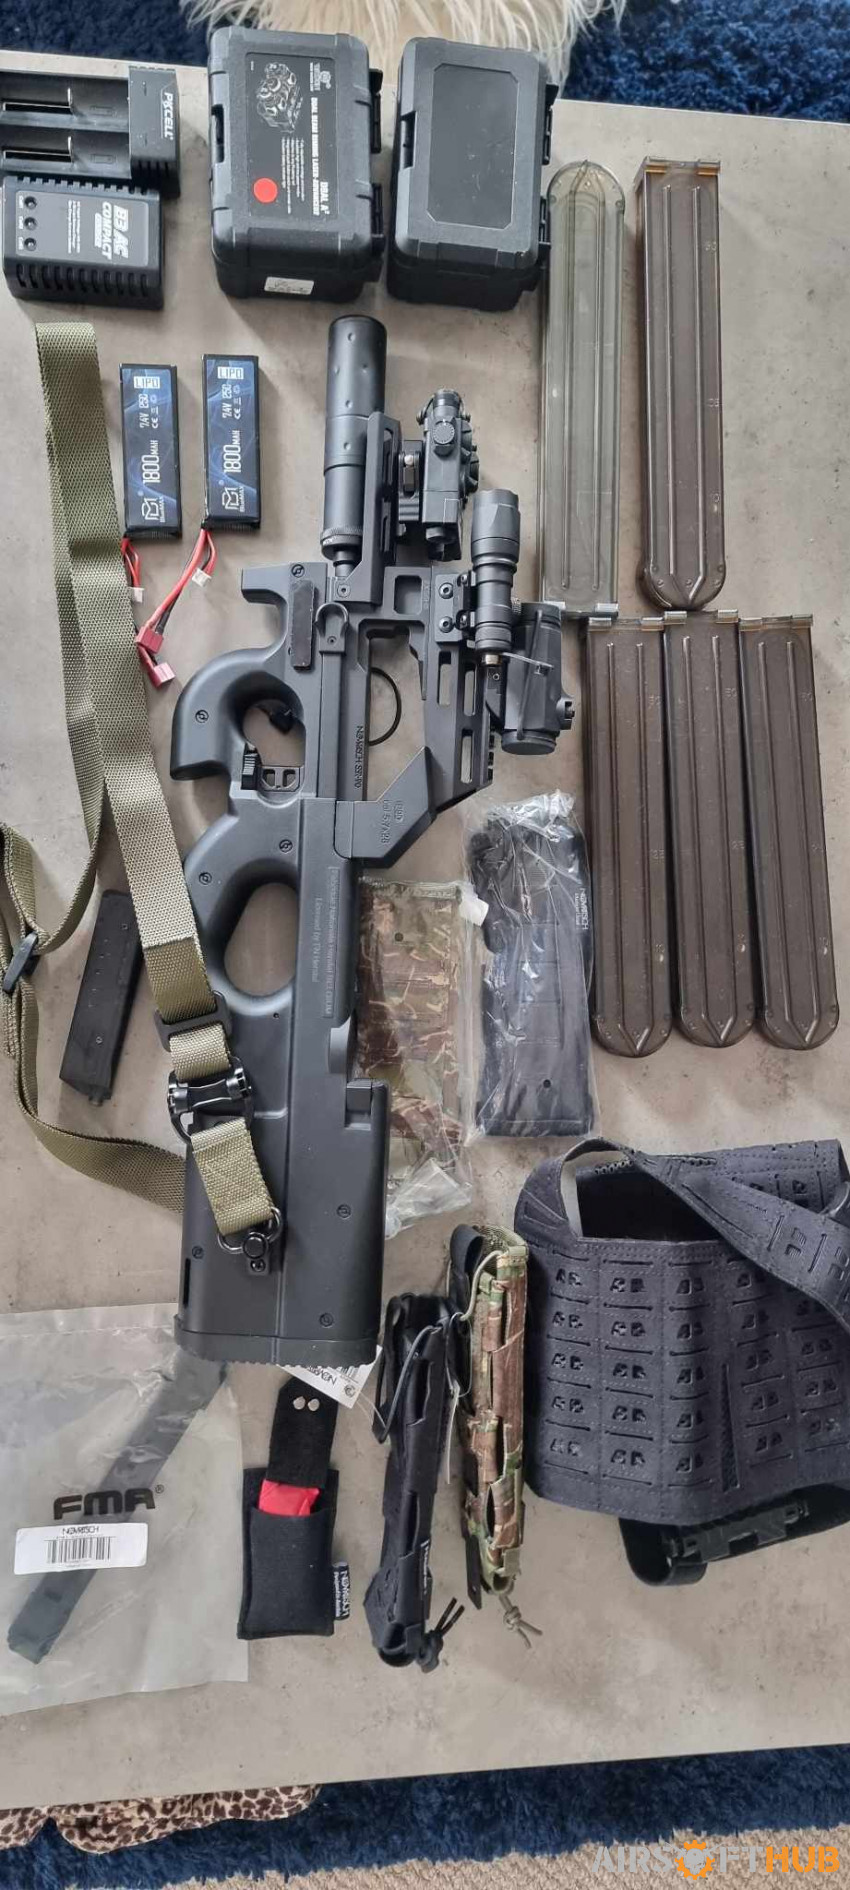 SSR 90 - With Kit Never used - Used airsoft equipment